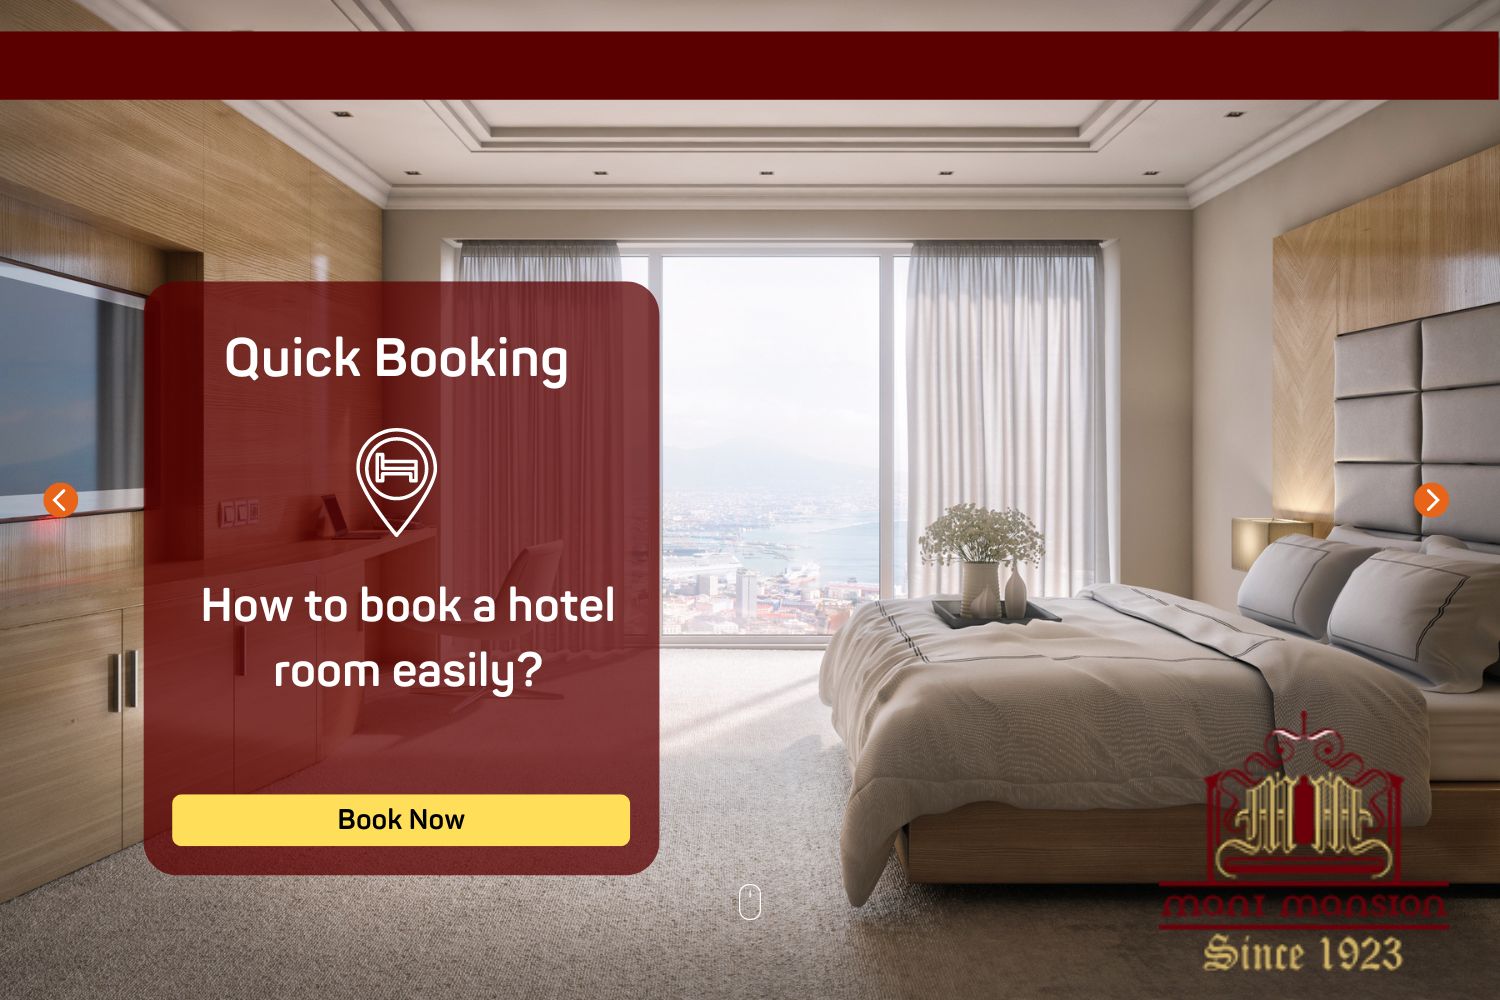 How to book a hotel room easily?